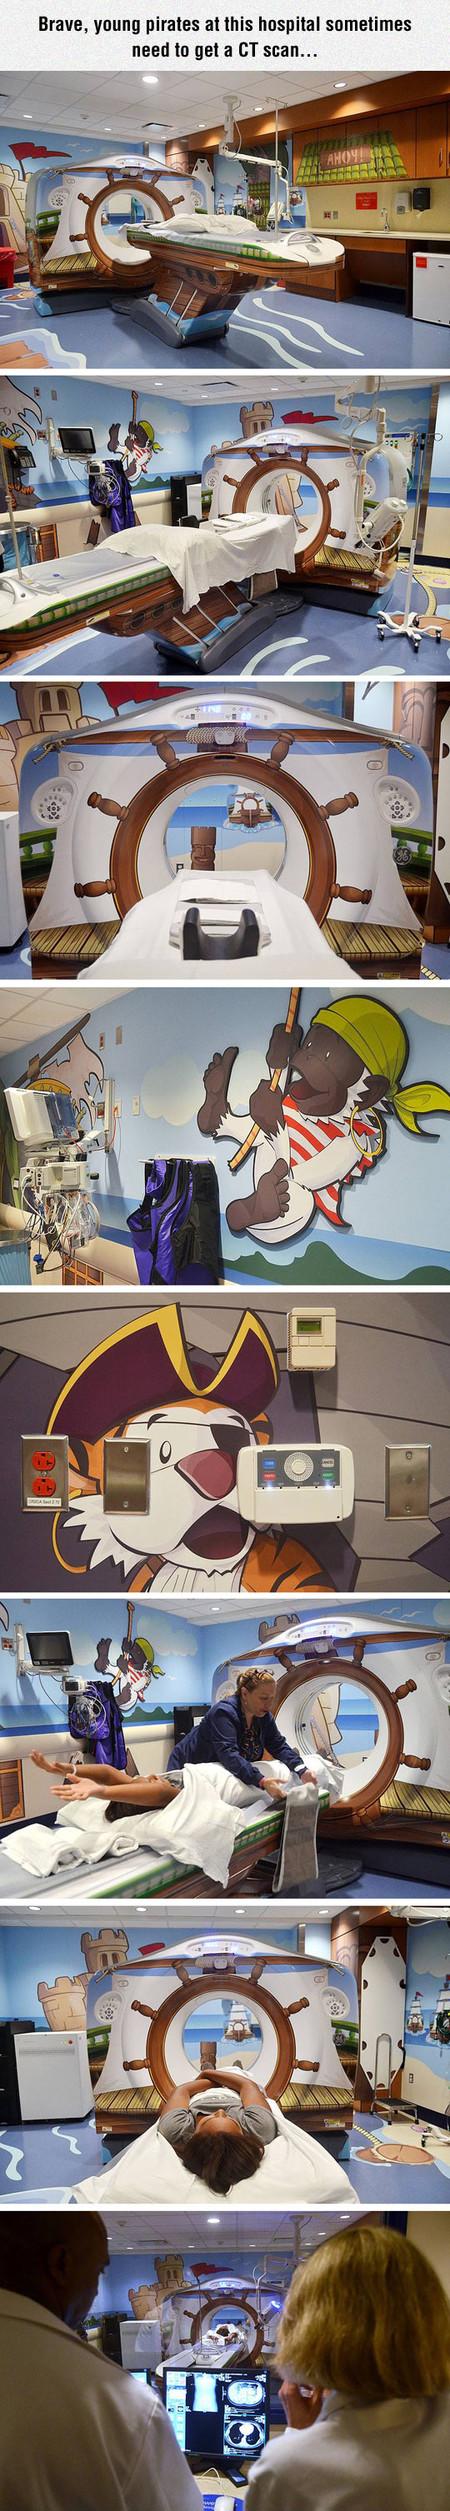 Brave Young Pirates Neet CT Scans Too